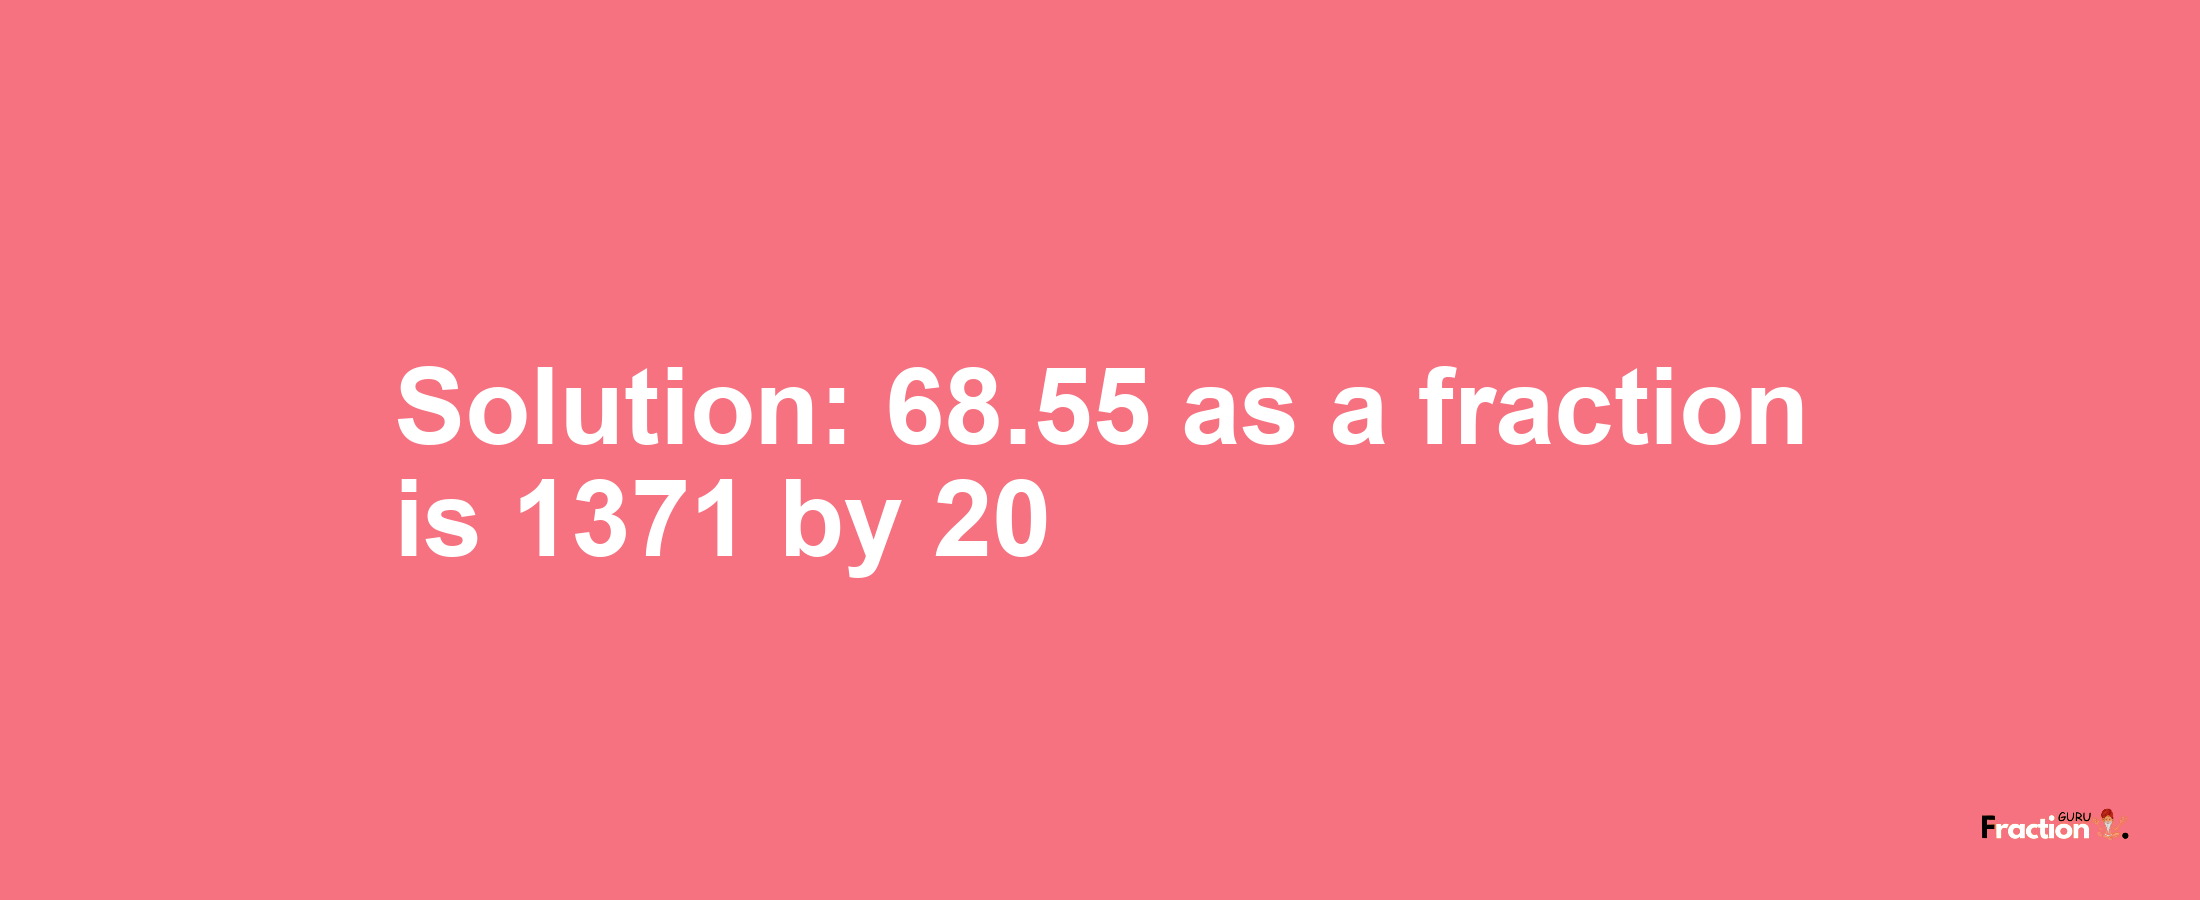 Solution:68.55 as a fraction is 1371/20